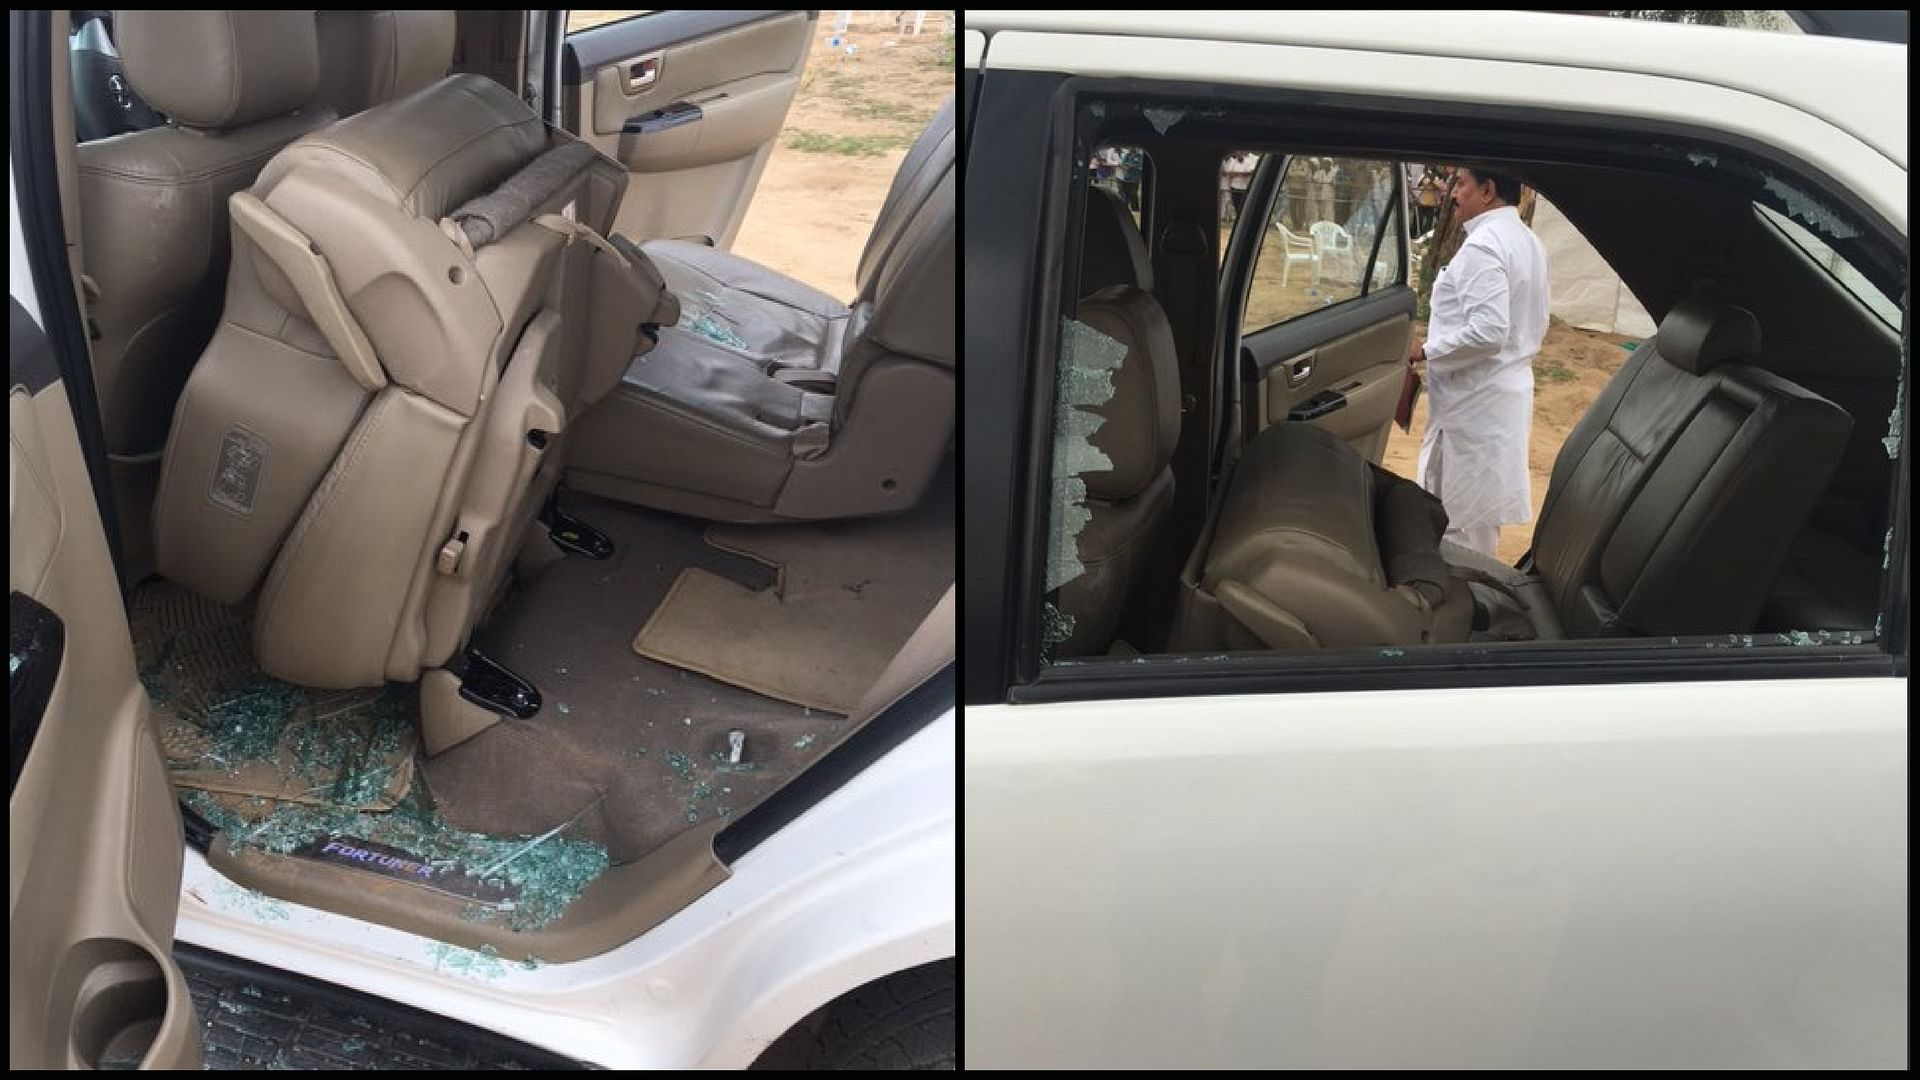 One of the cars from Rahul Gandhi’s envoy after it was attacked.